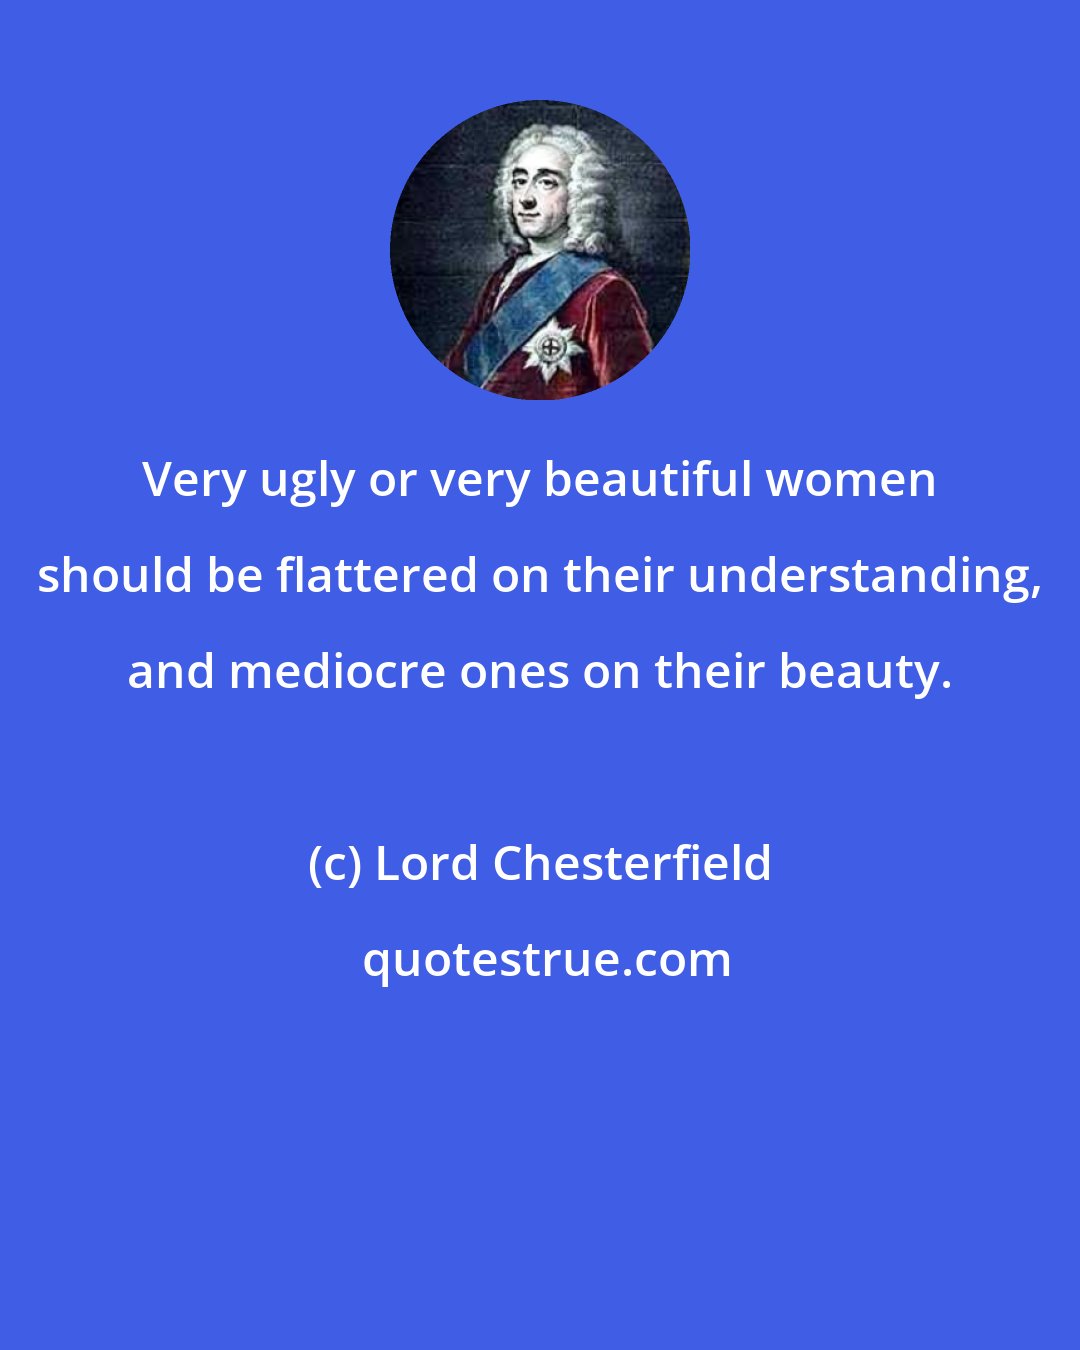 Lord Chesterfield: Very ugly or very beautiful women should be flattered on their understanding, and mediocre ones on their beauty.